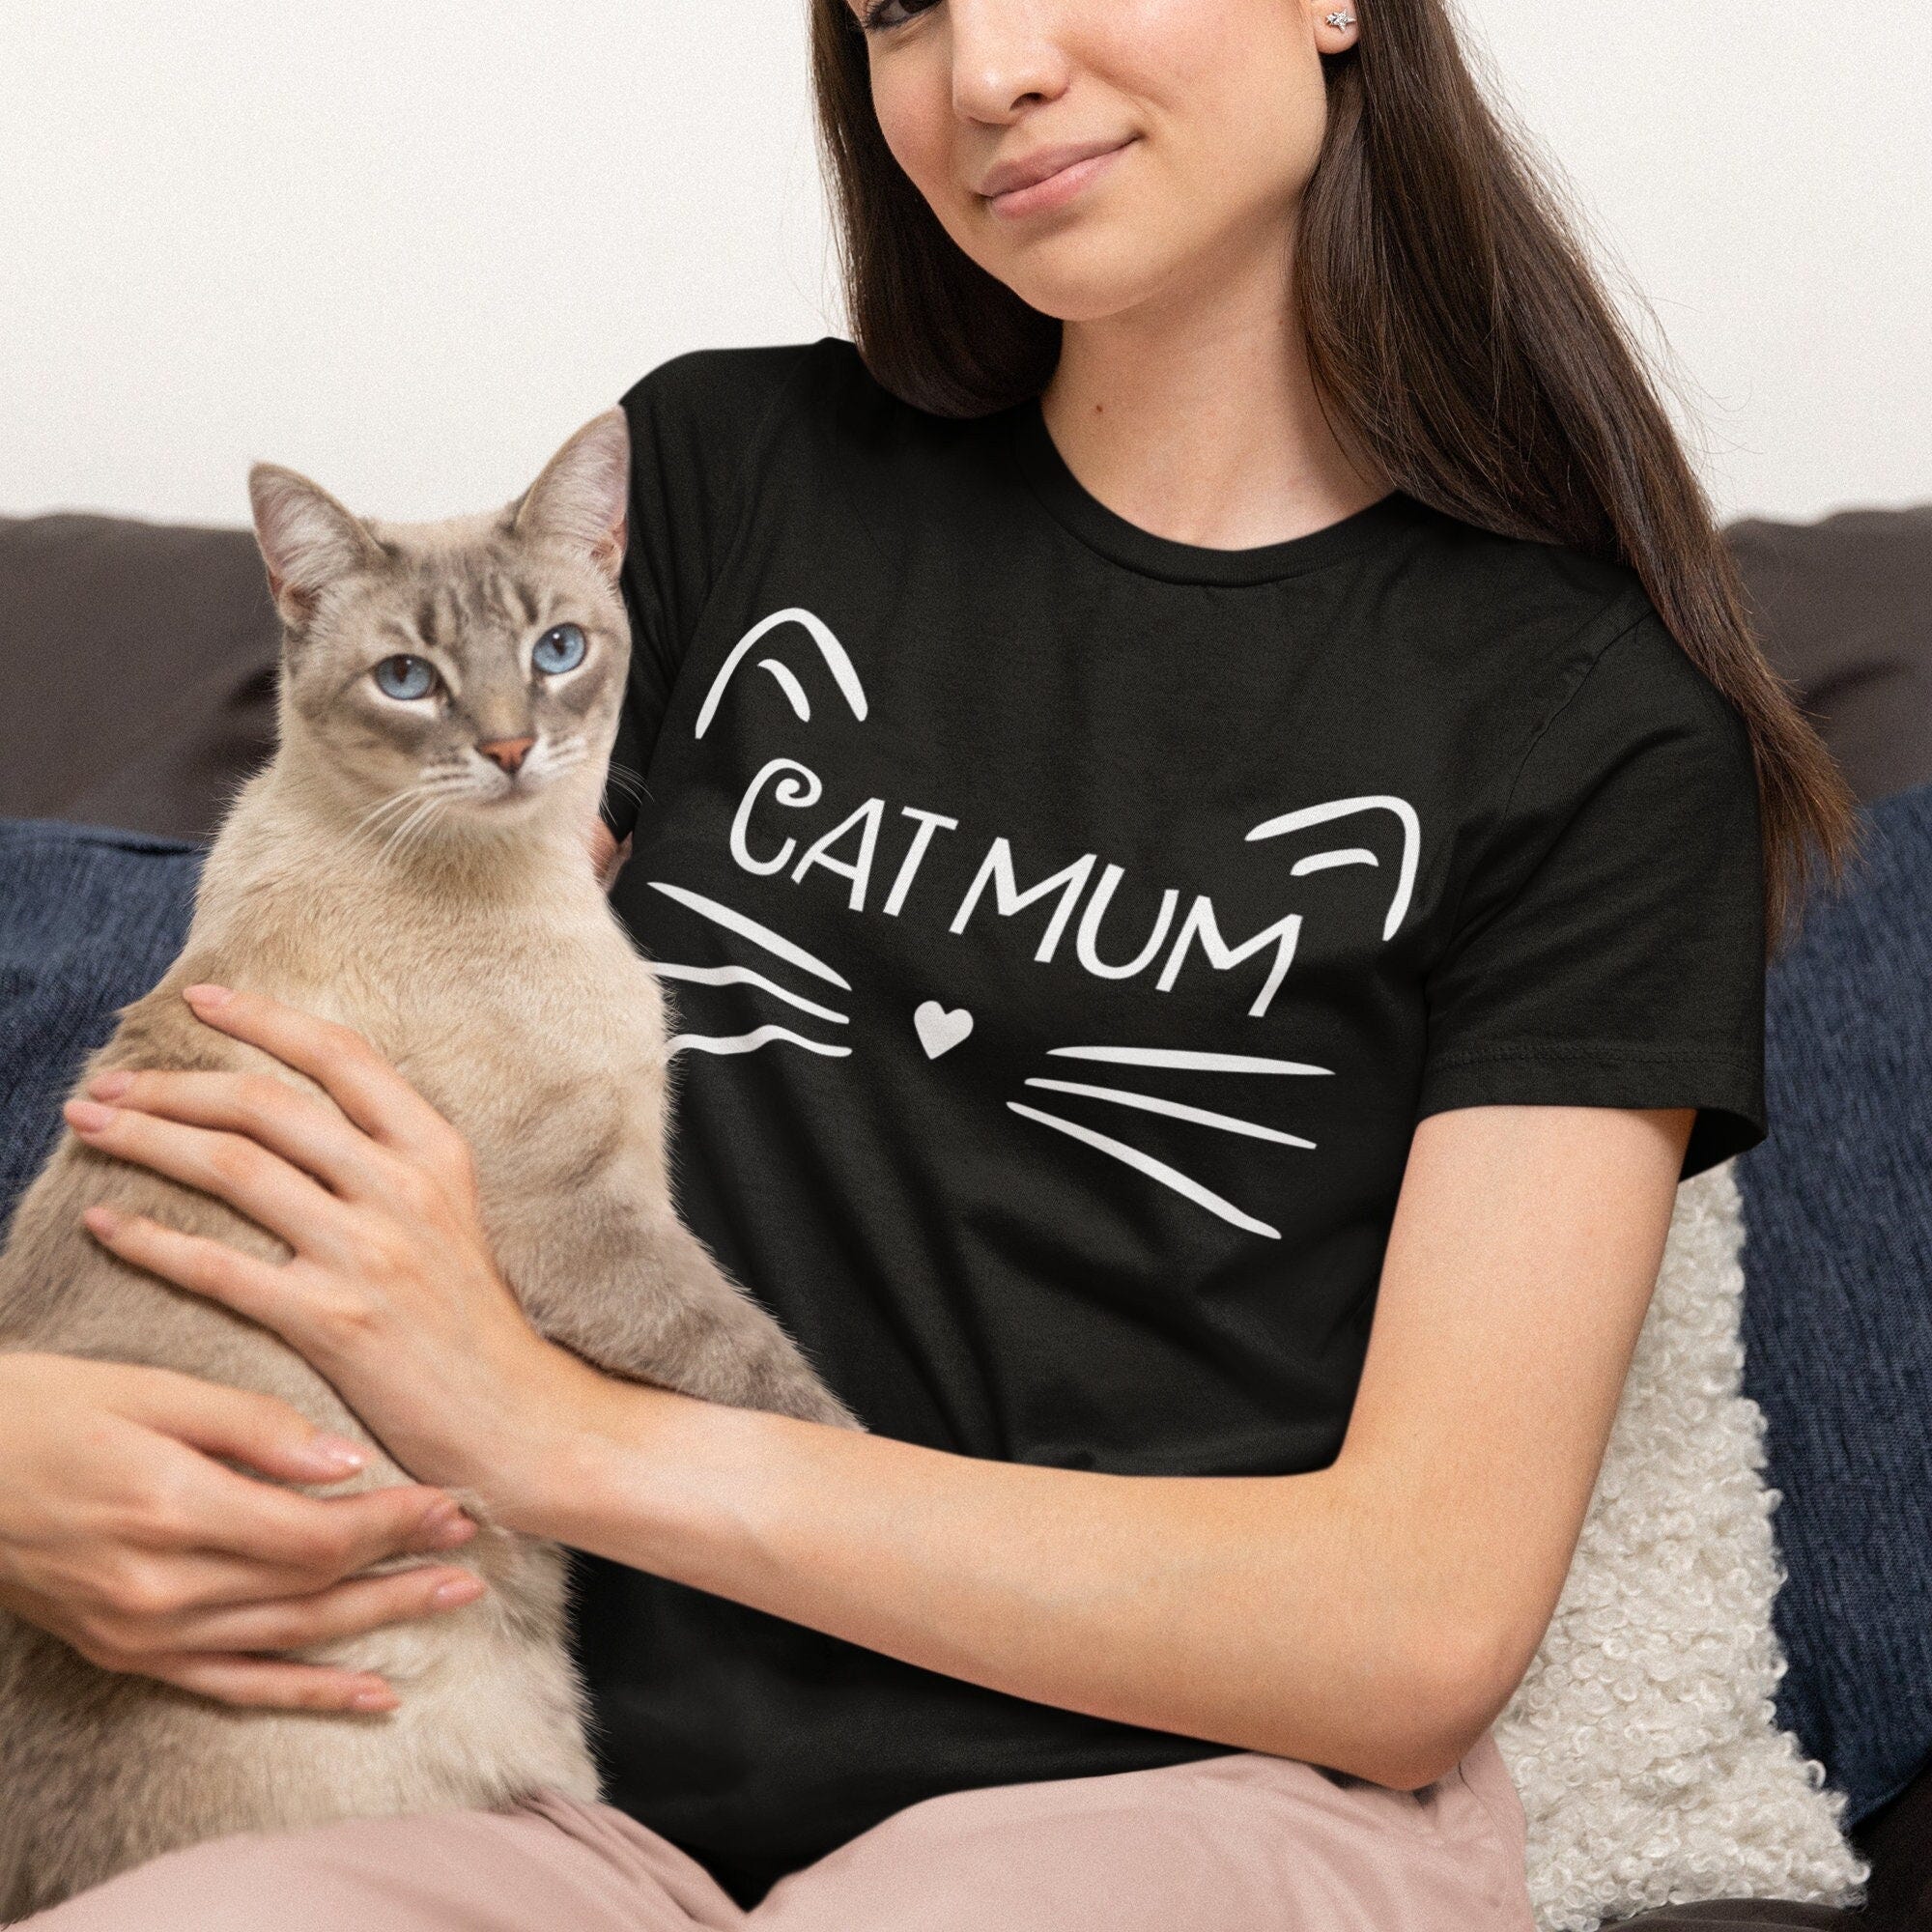 Cat Mum T-Shirt / Crazy Cat Lady, Cat Lover Gift, Gifts for her, Unique Gift Ideas, Cute Cat Tee,